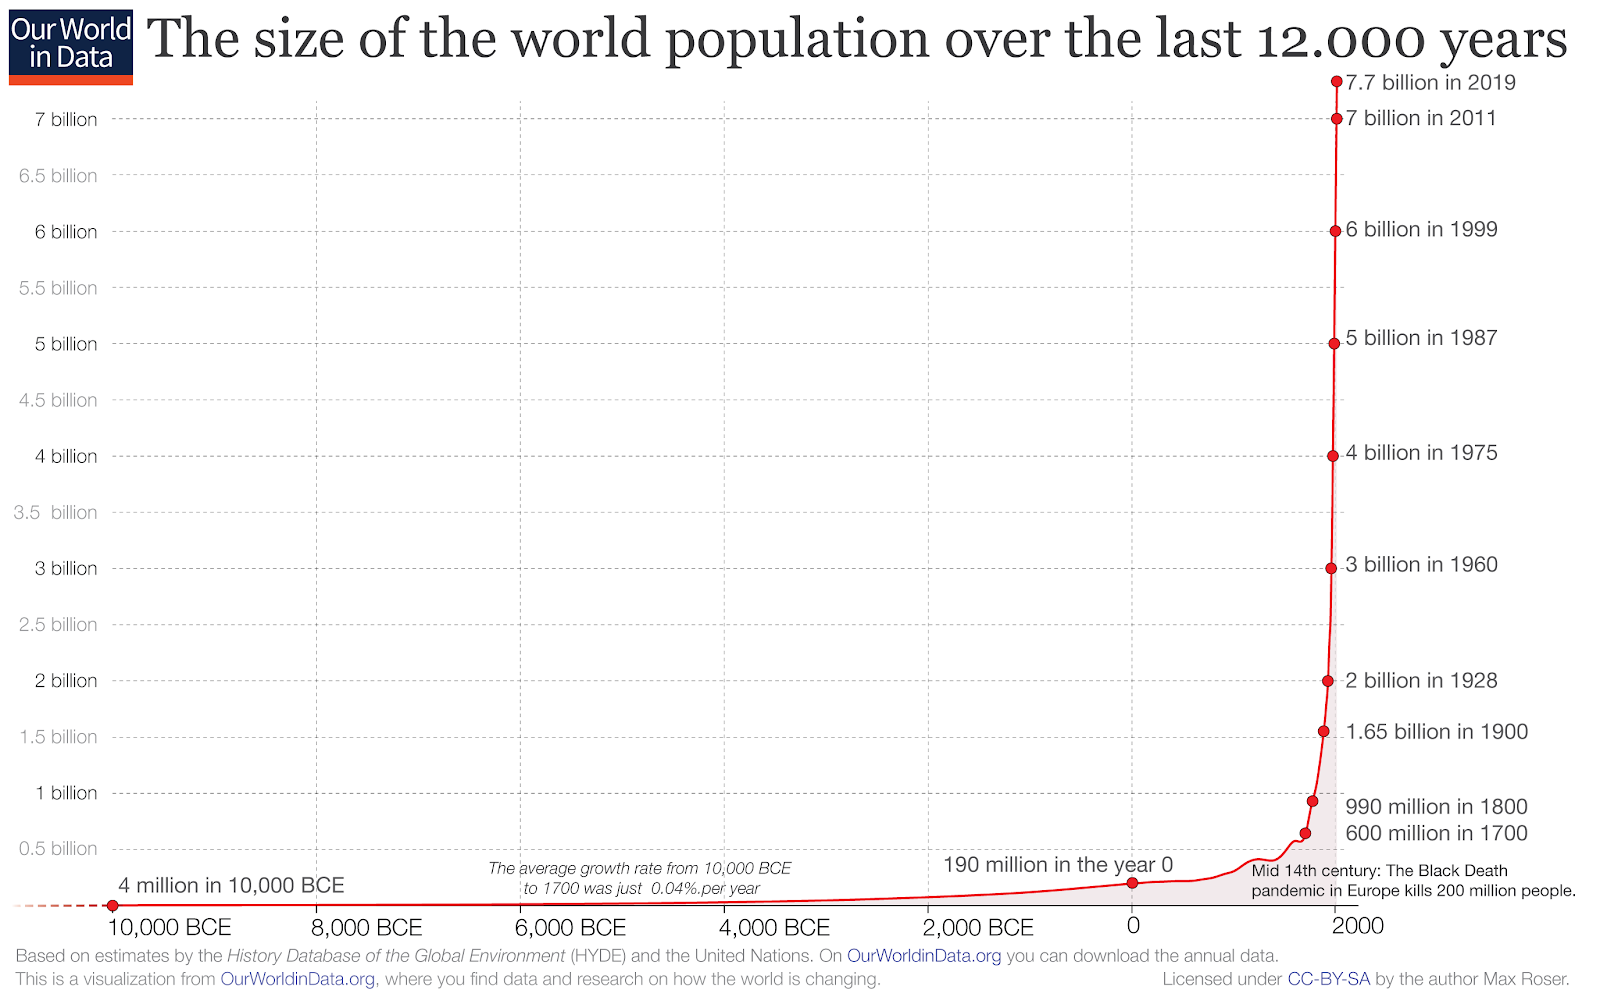 Graph on arithmetic scale of human population since 10,000 BCE showing dramatic rise in last 100 years